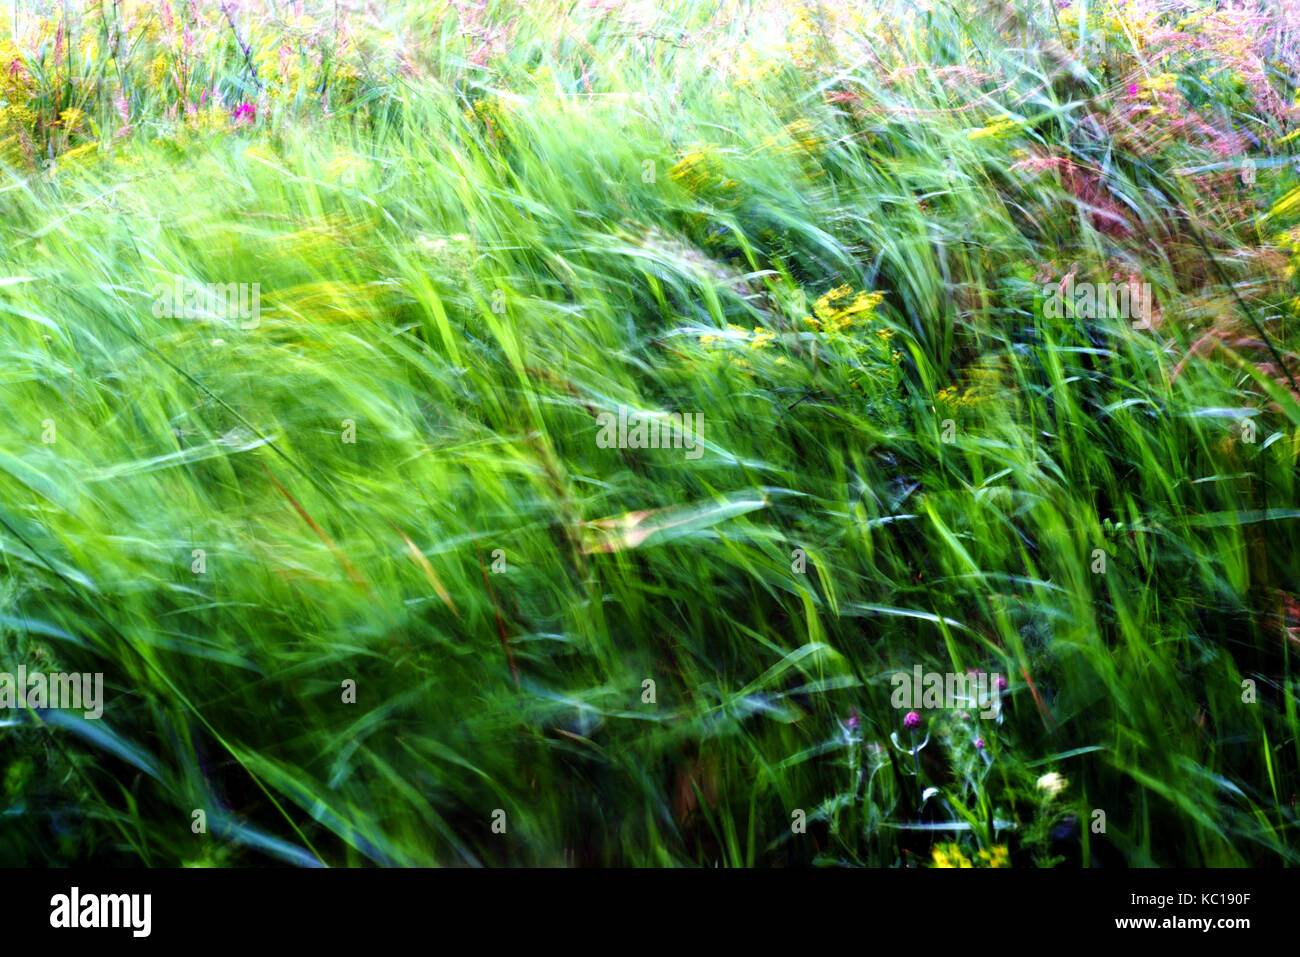 Green weeds and grass stalks blown in the wind with intentional motion blur using slow shutter speed Stock Photo